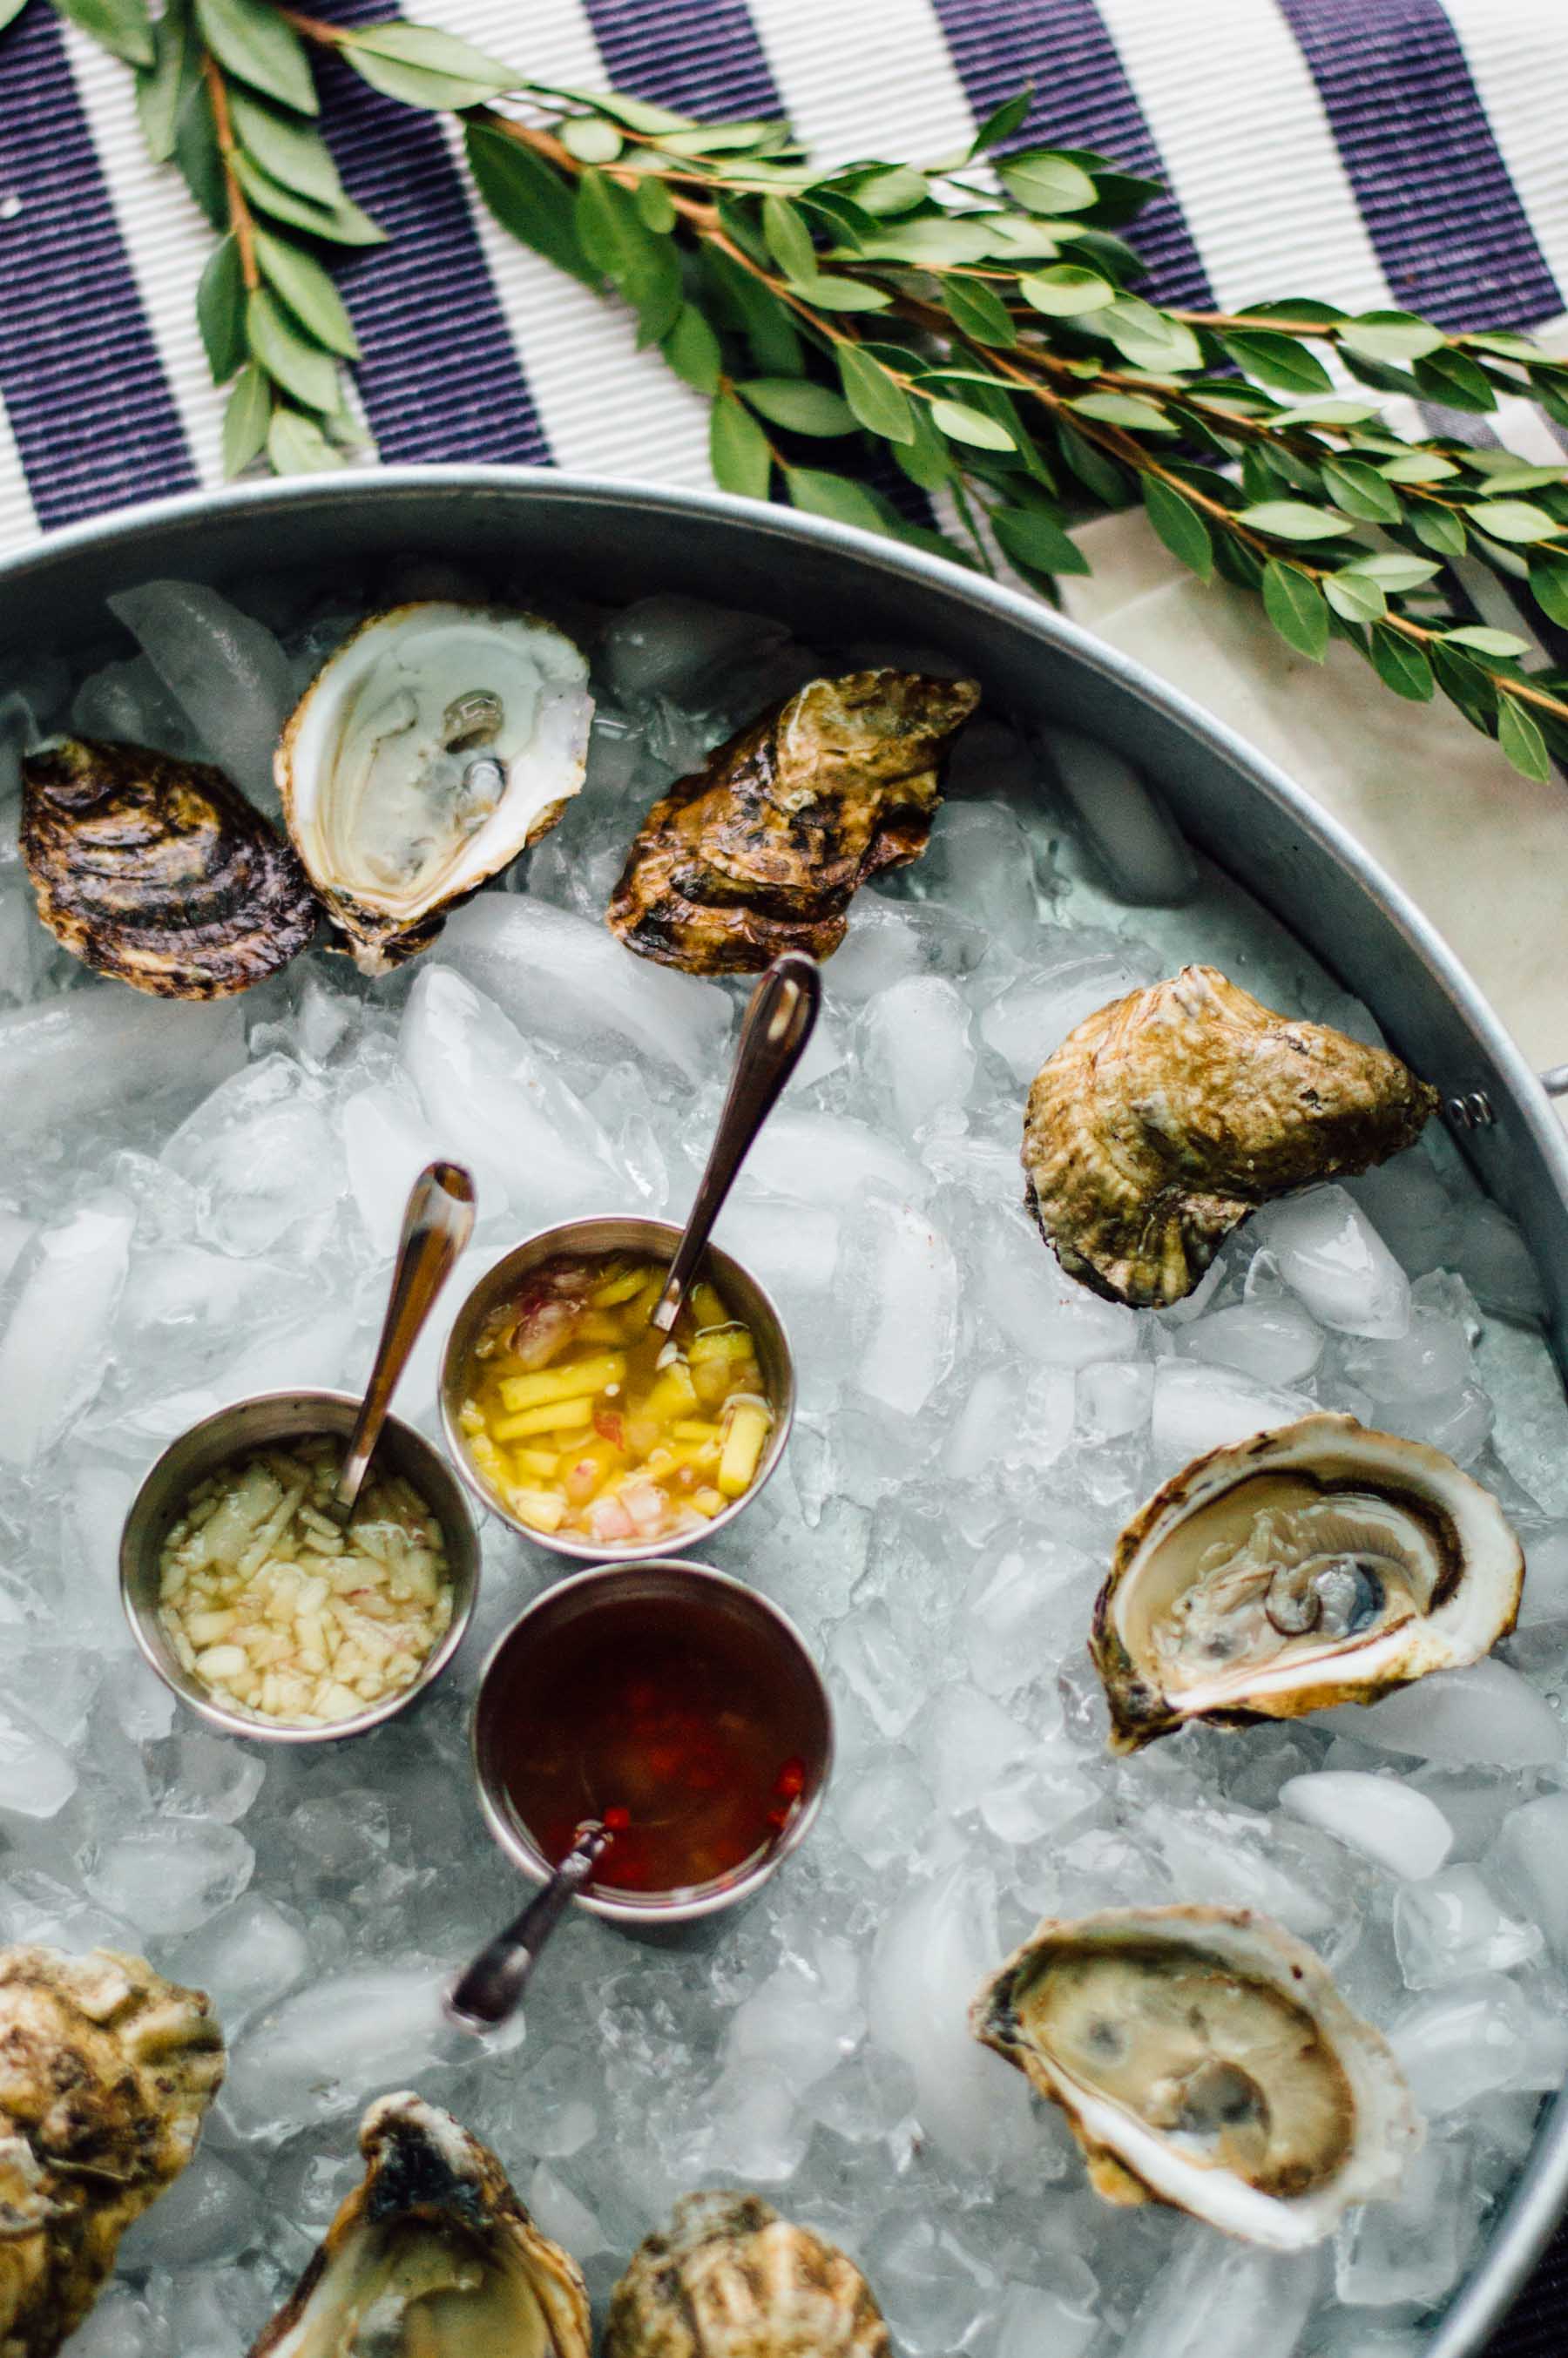 How to host an indoor oyster fest with Hoegaarden beer and 3 homemade mignonettes! | bygabriella.co